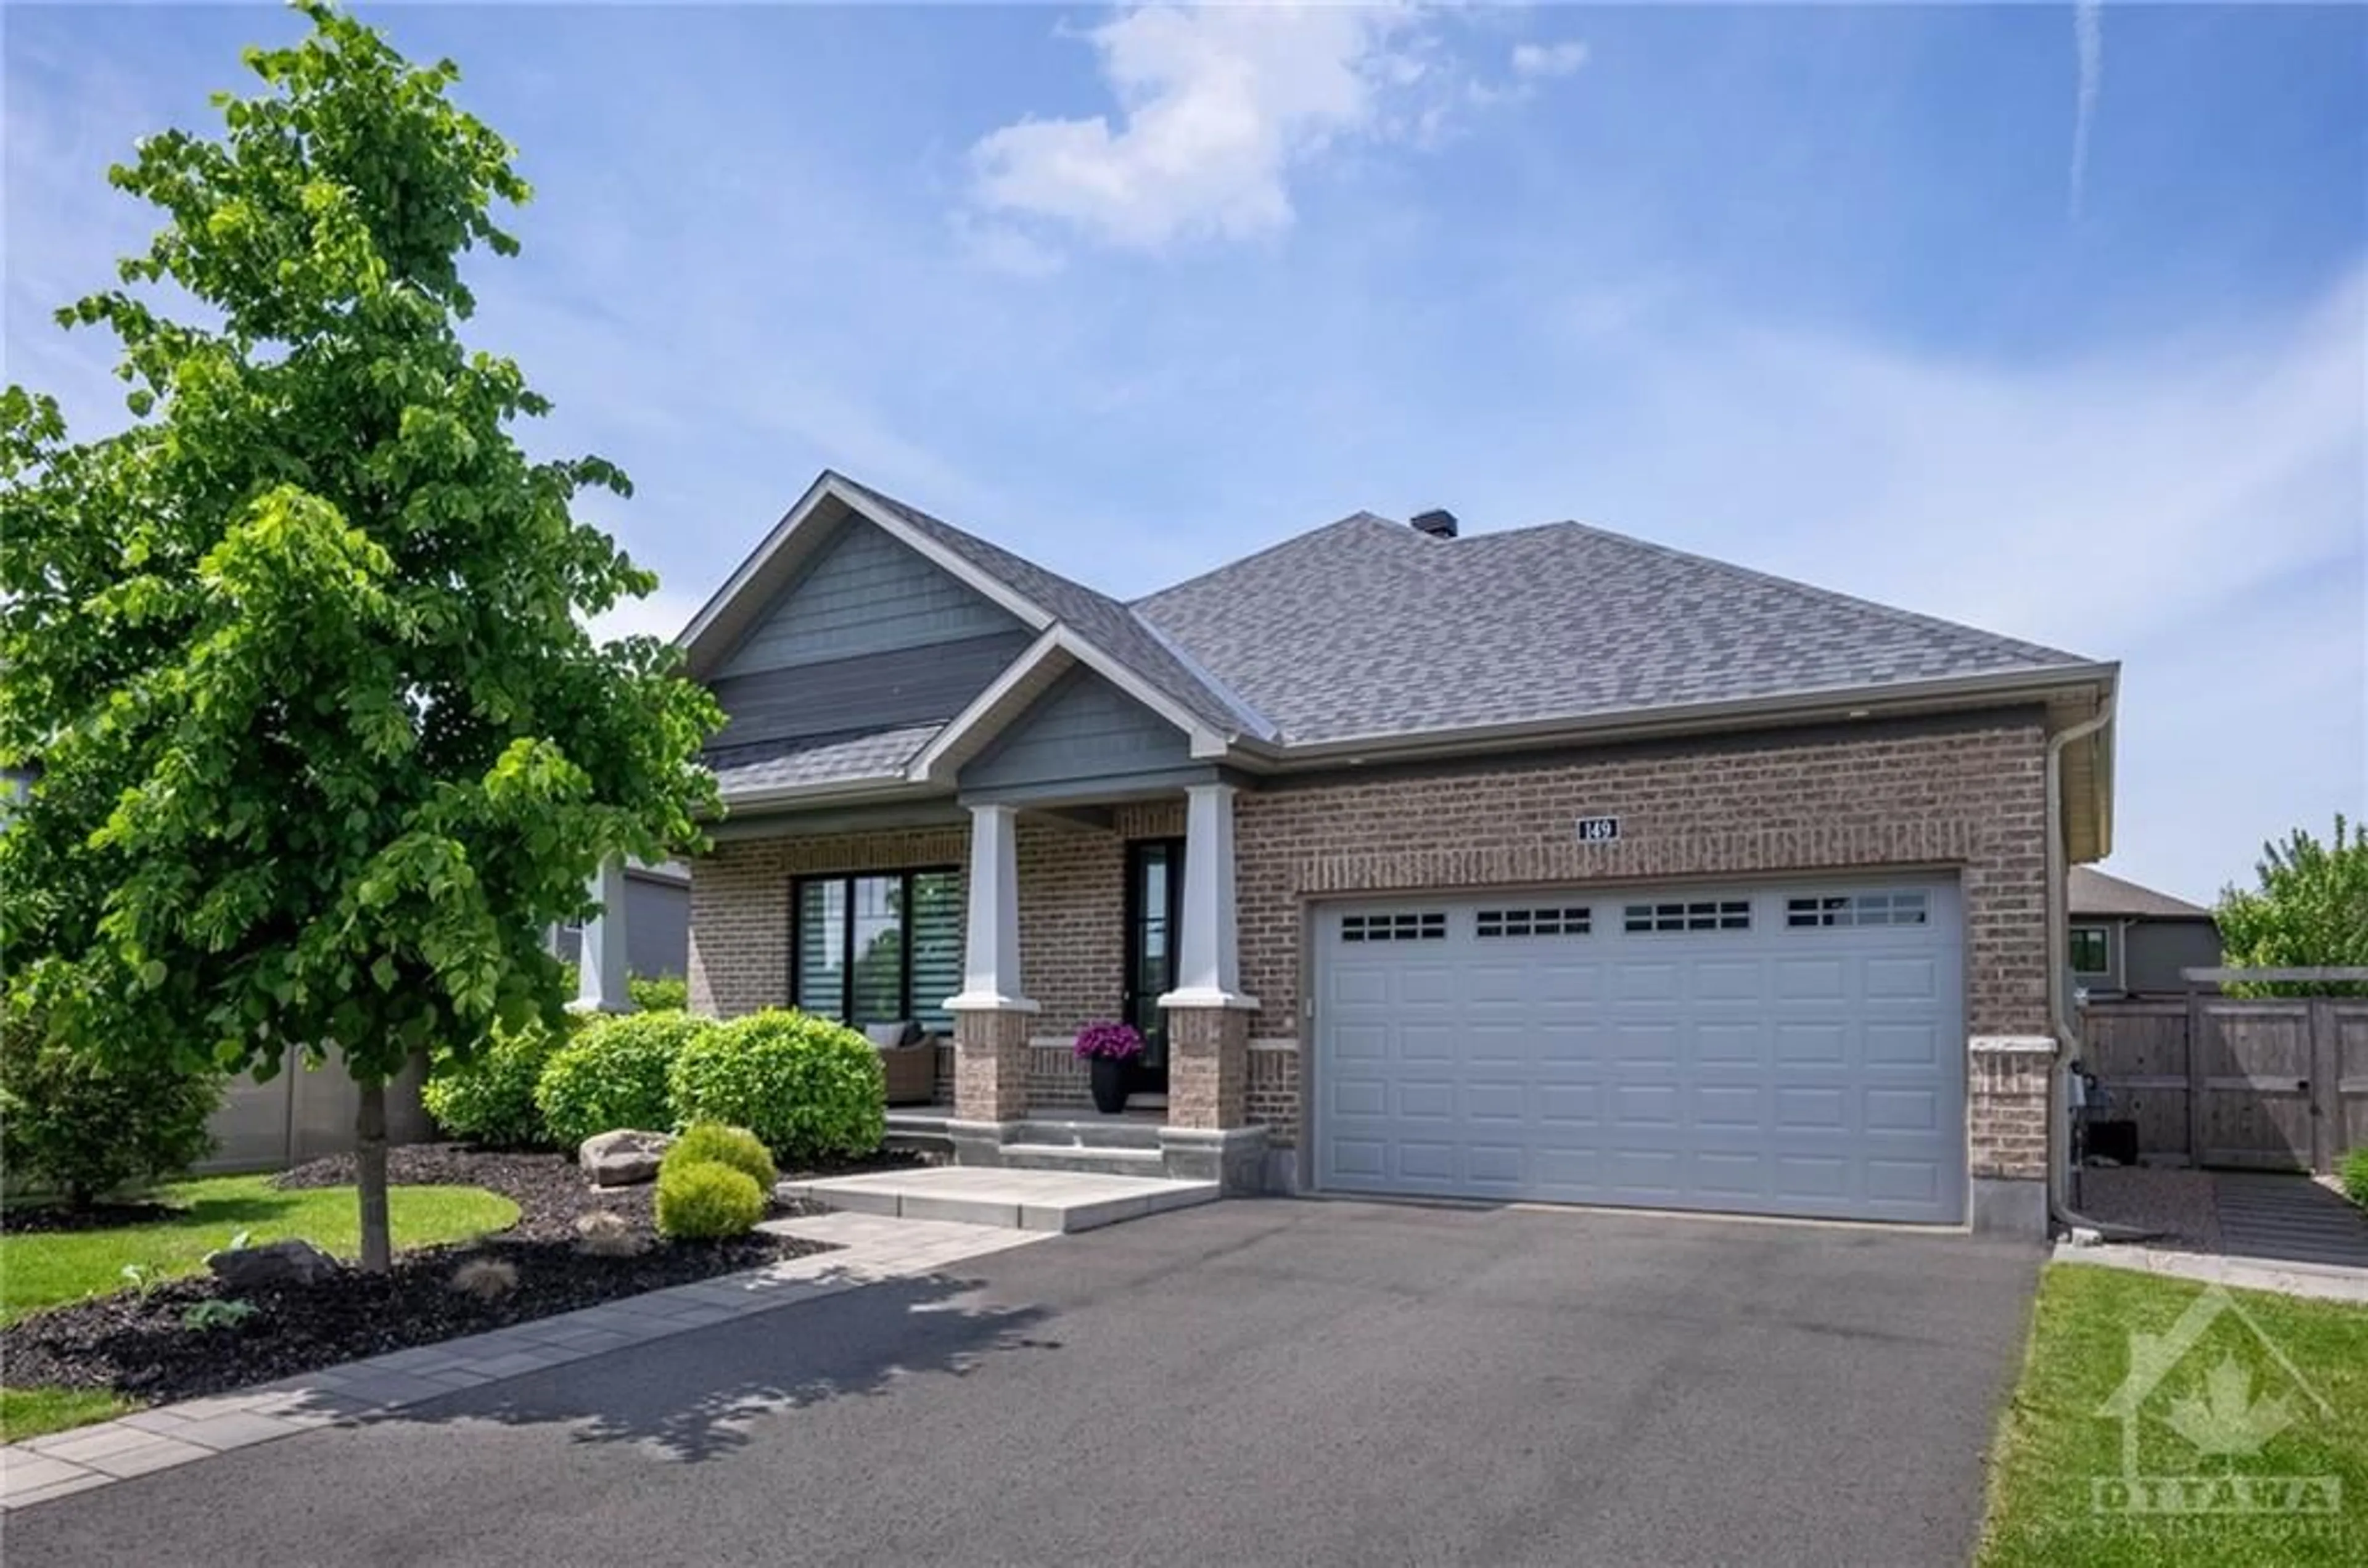 Home with brick exterior material for 149 SPINDRIFT Cir, Manotick Ontario K4M 0G5